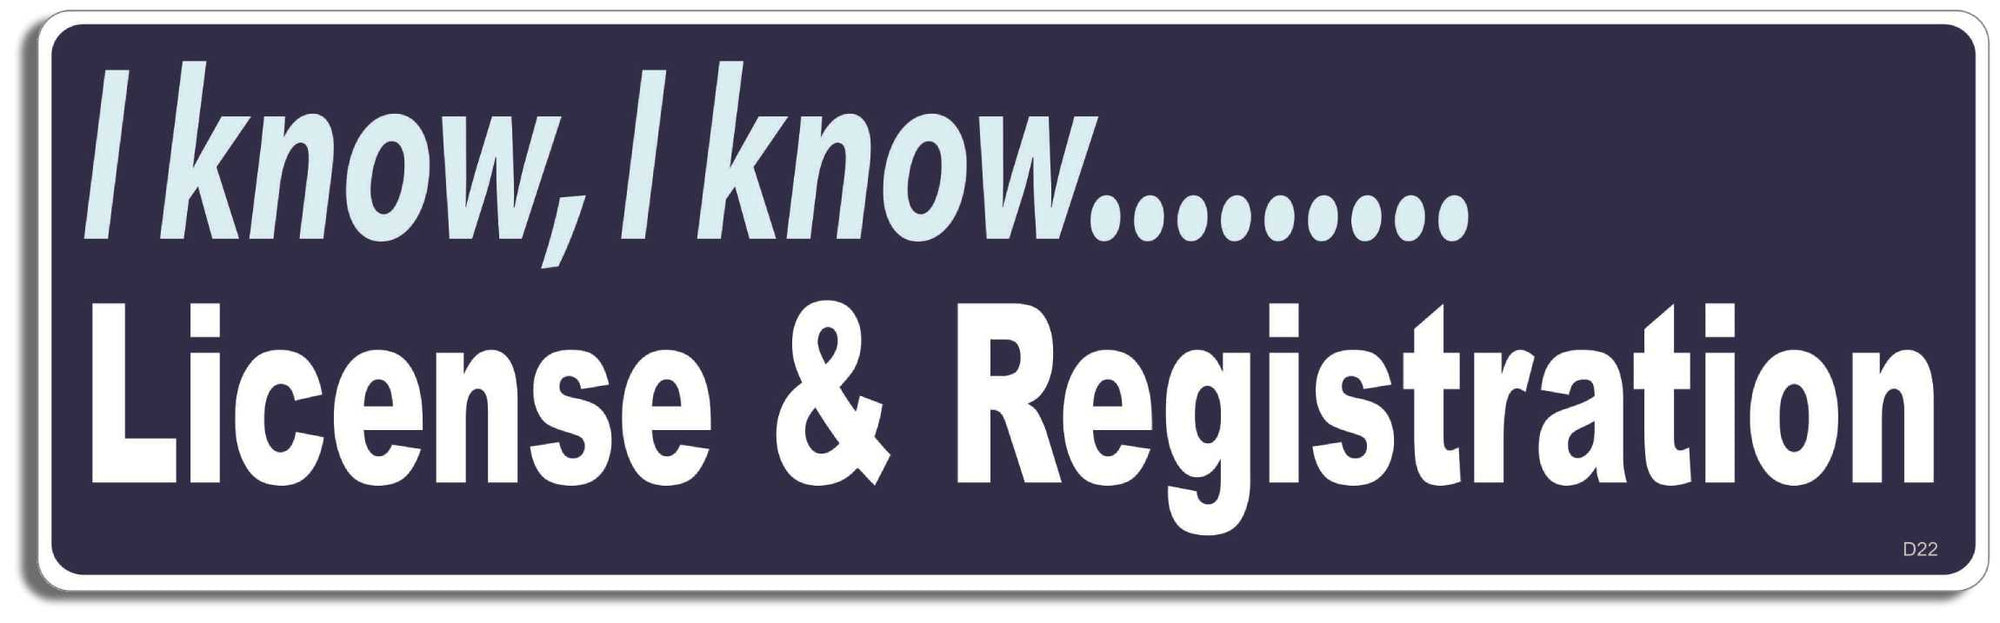 I know, I know....License & registration - 3" x 10" Bumper Sticker--Car Magnet- -  Decal Bumper Sticker-funny Bumper Sticker Car Magnet I know, I know License & registration-  Decal for carsanti police, officer, police, pulled over